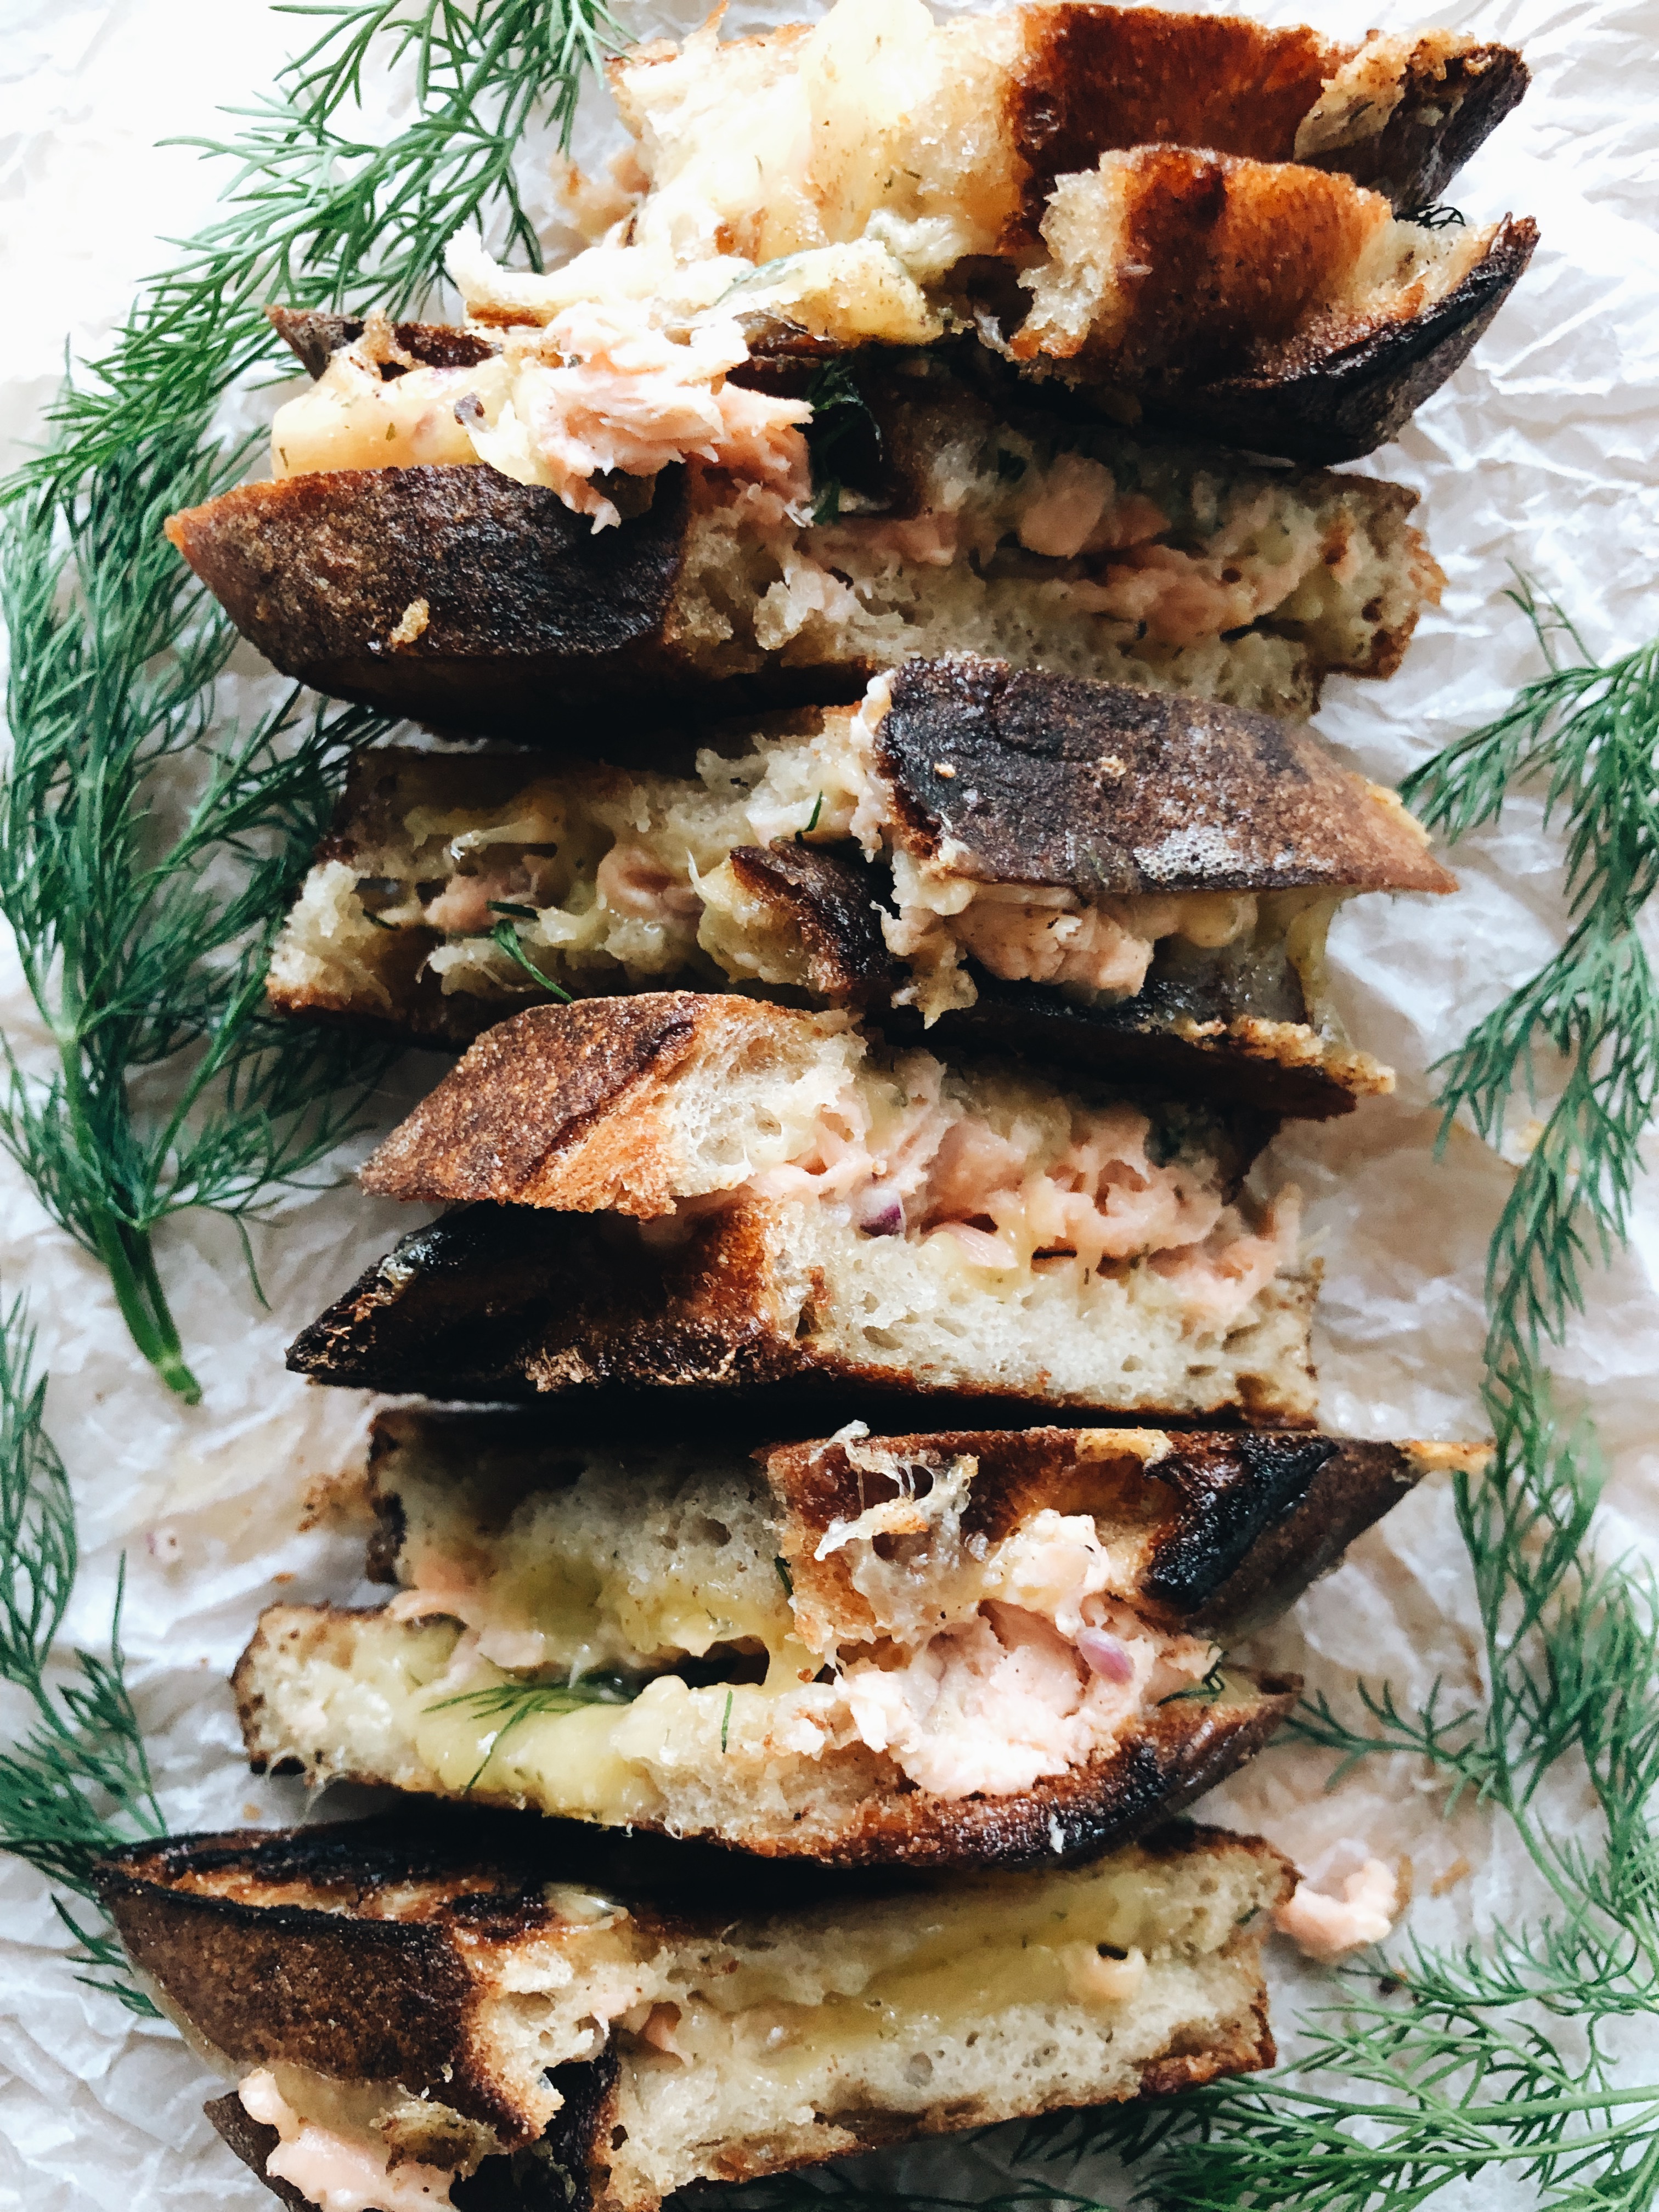 Smoked Salmon and Dill Havarti Grilled Cheese Sandwich / Bev Cooks